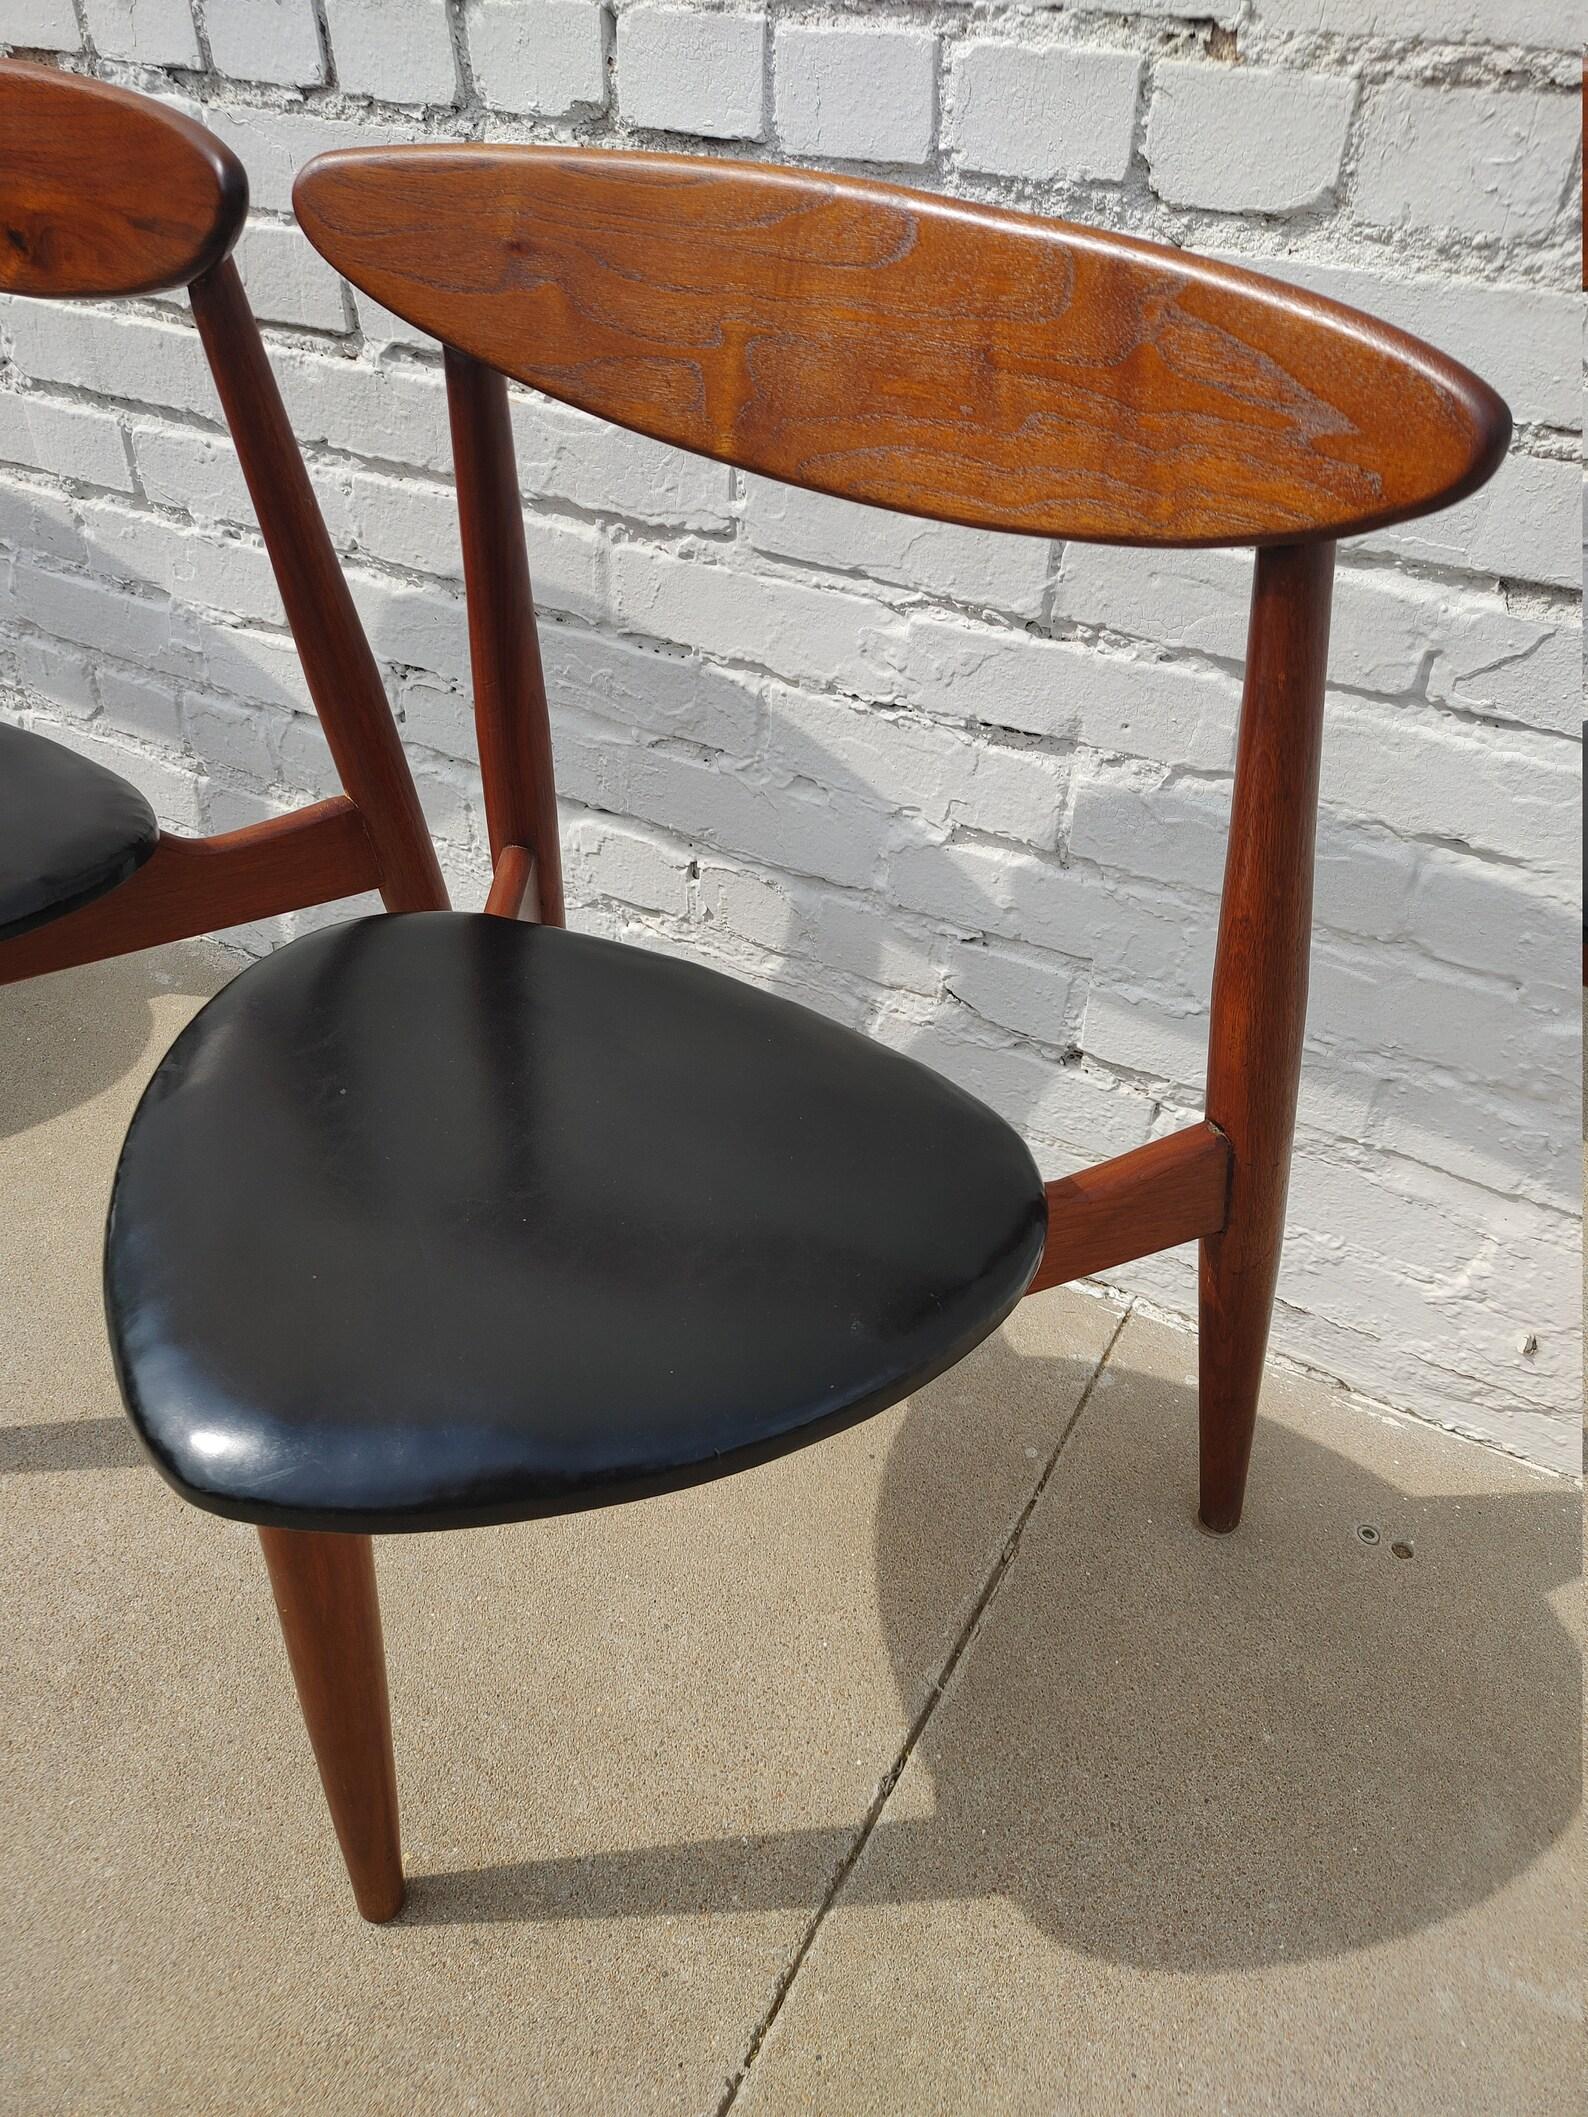 Mid Century Modern Hans Wegner Inspired Dining Chairs

Above average vintage condition and structurally sound. Have some expected slight finish wear and scratching.

Additional information:
Materials: Walnut
Vintage from the 1960s
Dimensions: 22.5 